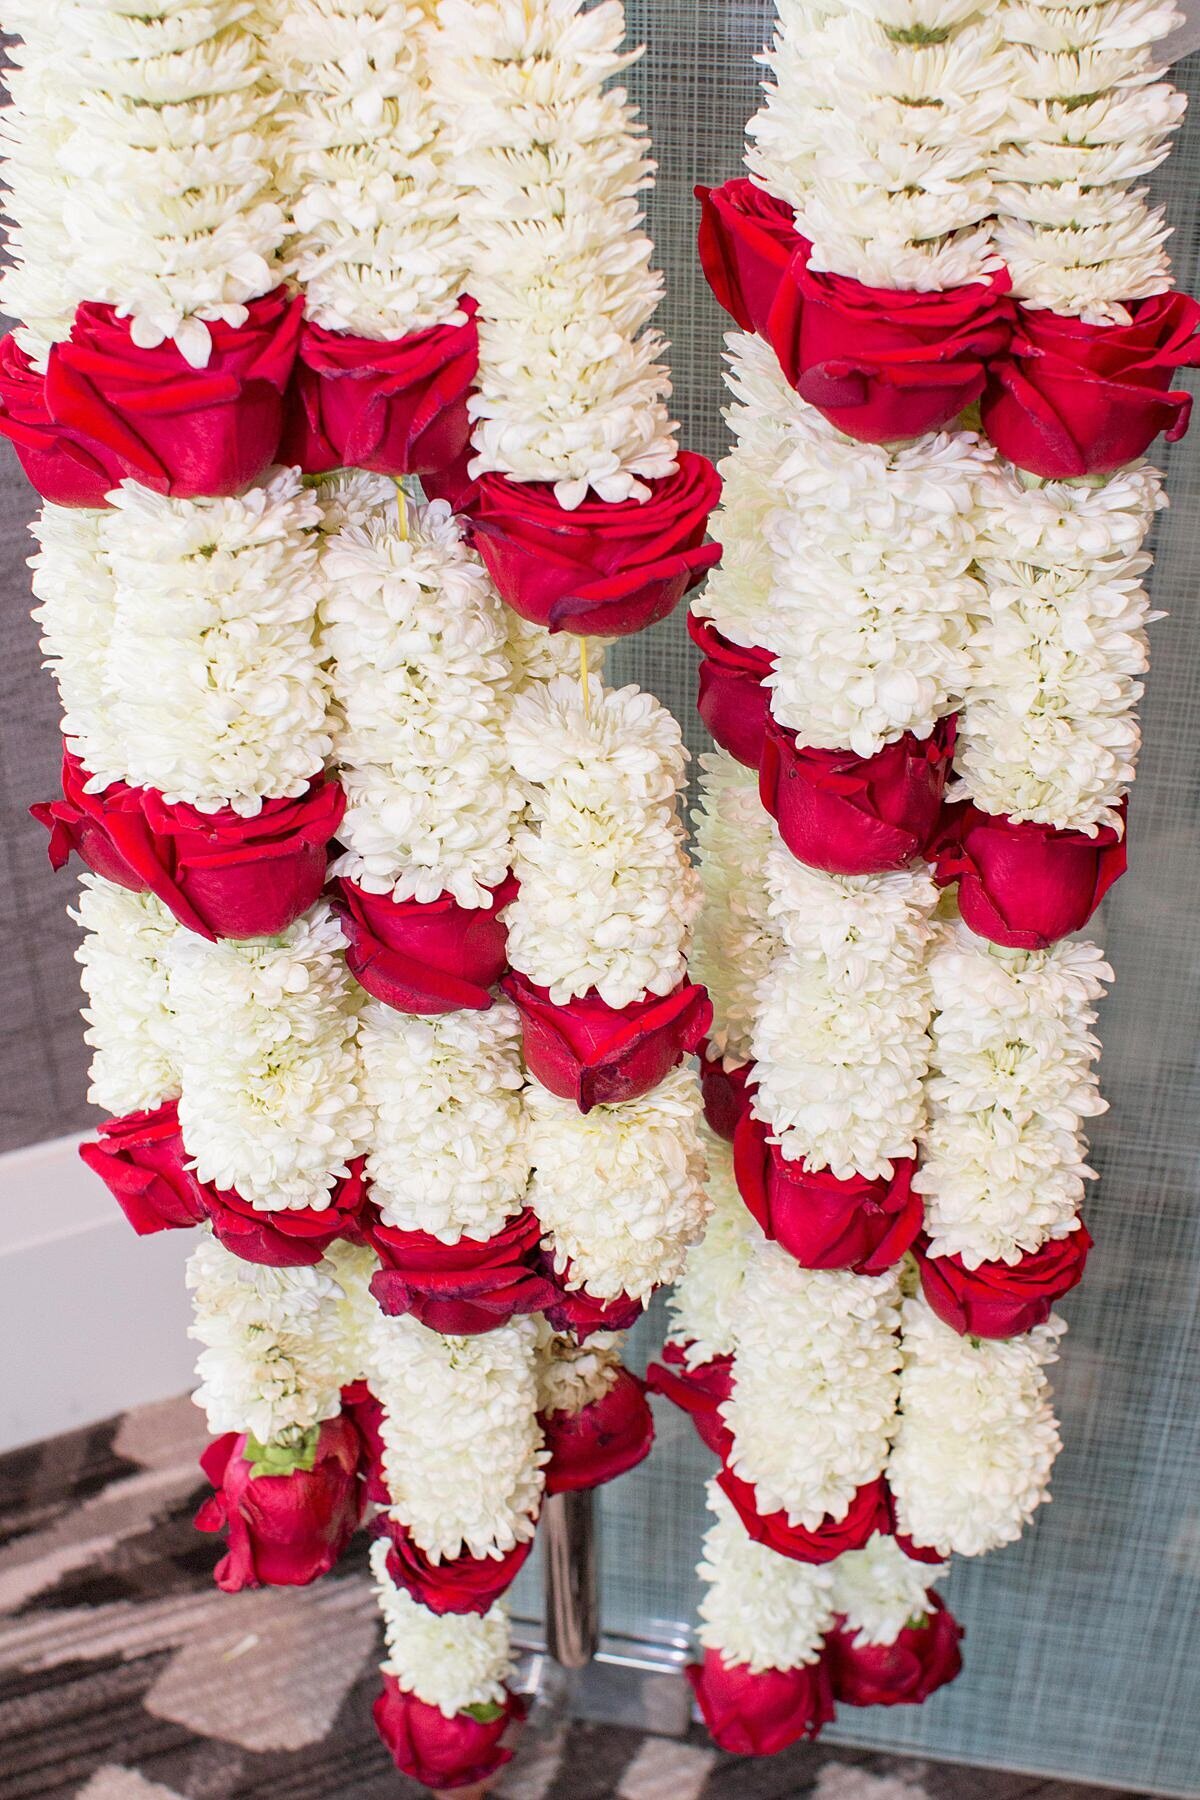 Two varmala garlands made of mums accented with red roses.